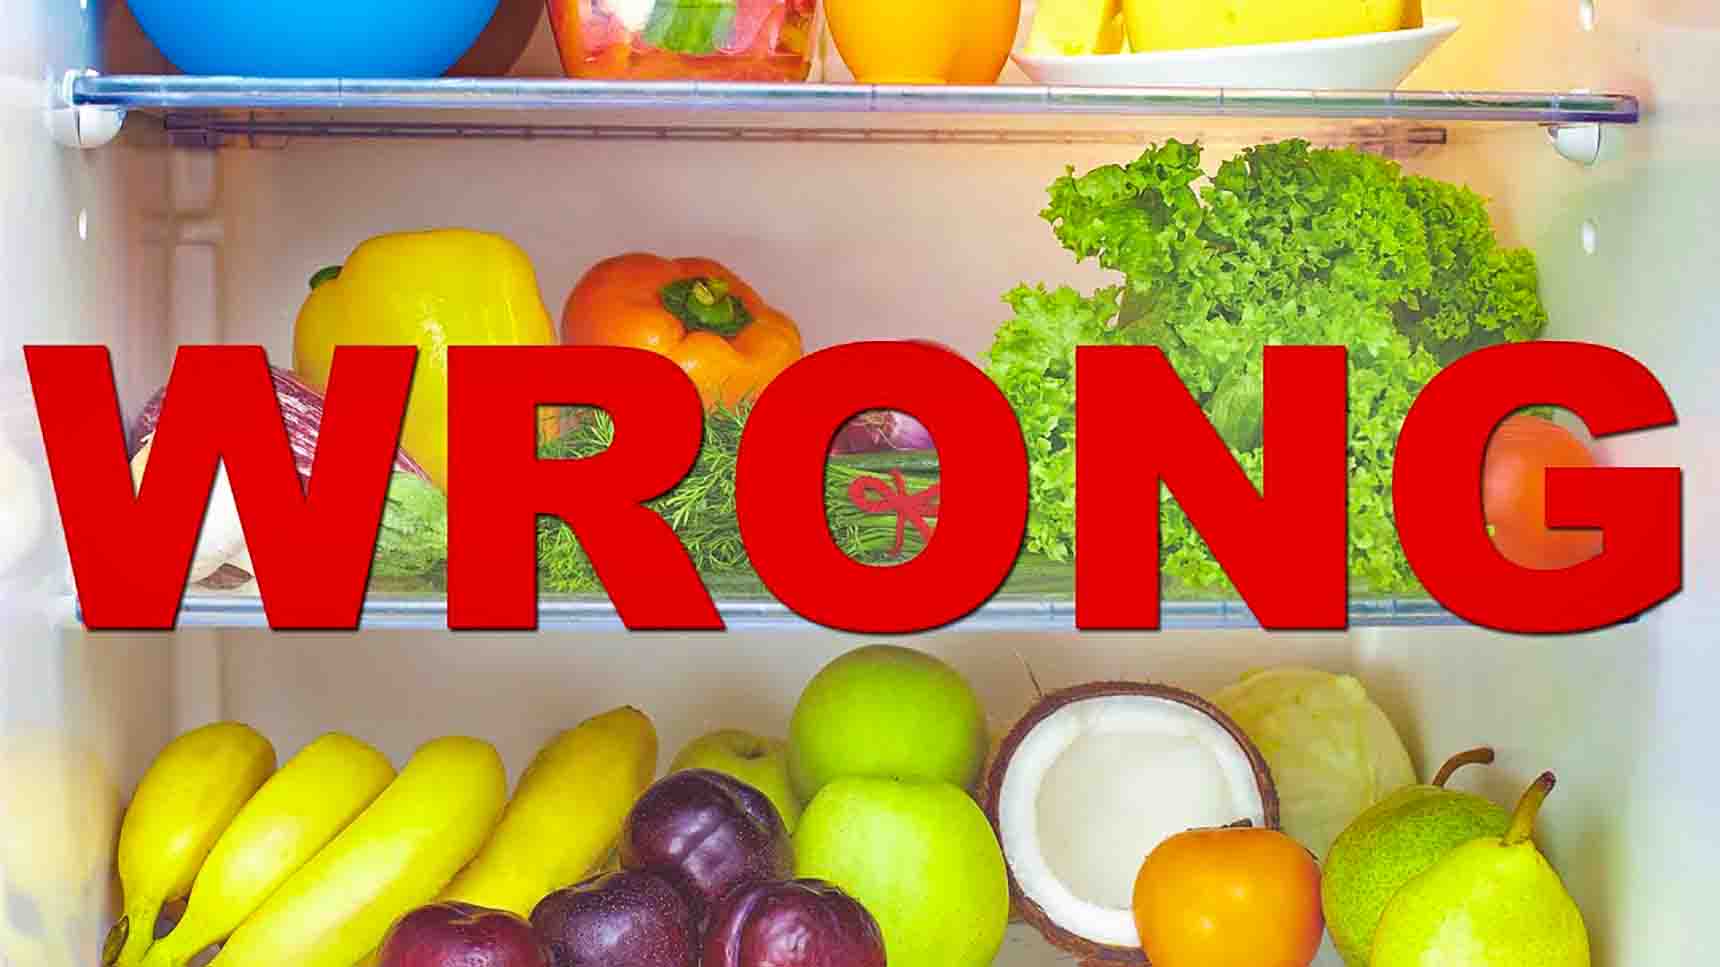 11 Foods You Shouldn't Refrigerate